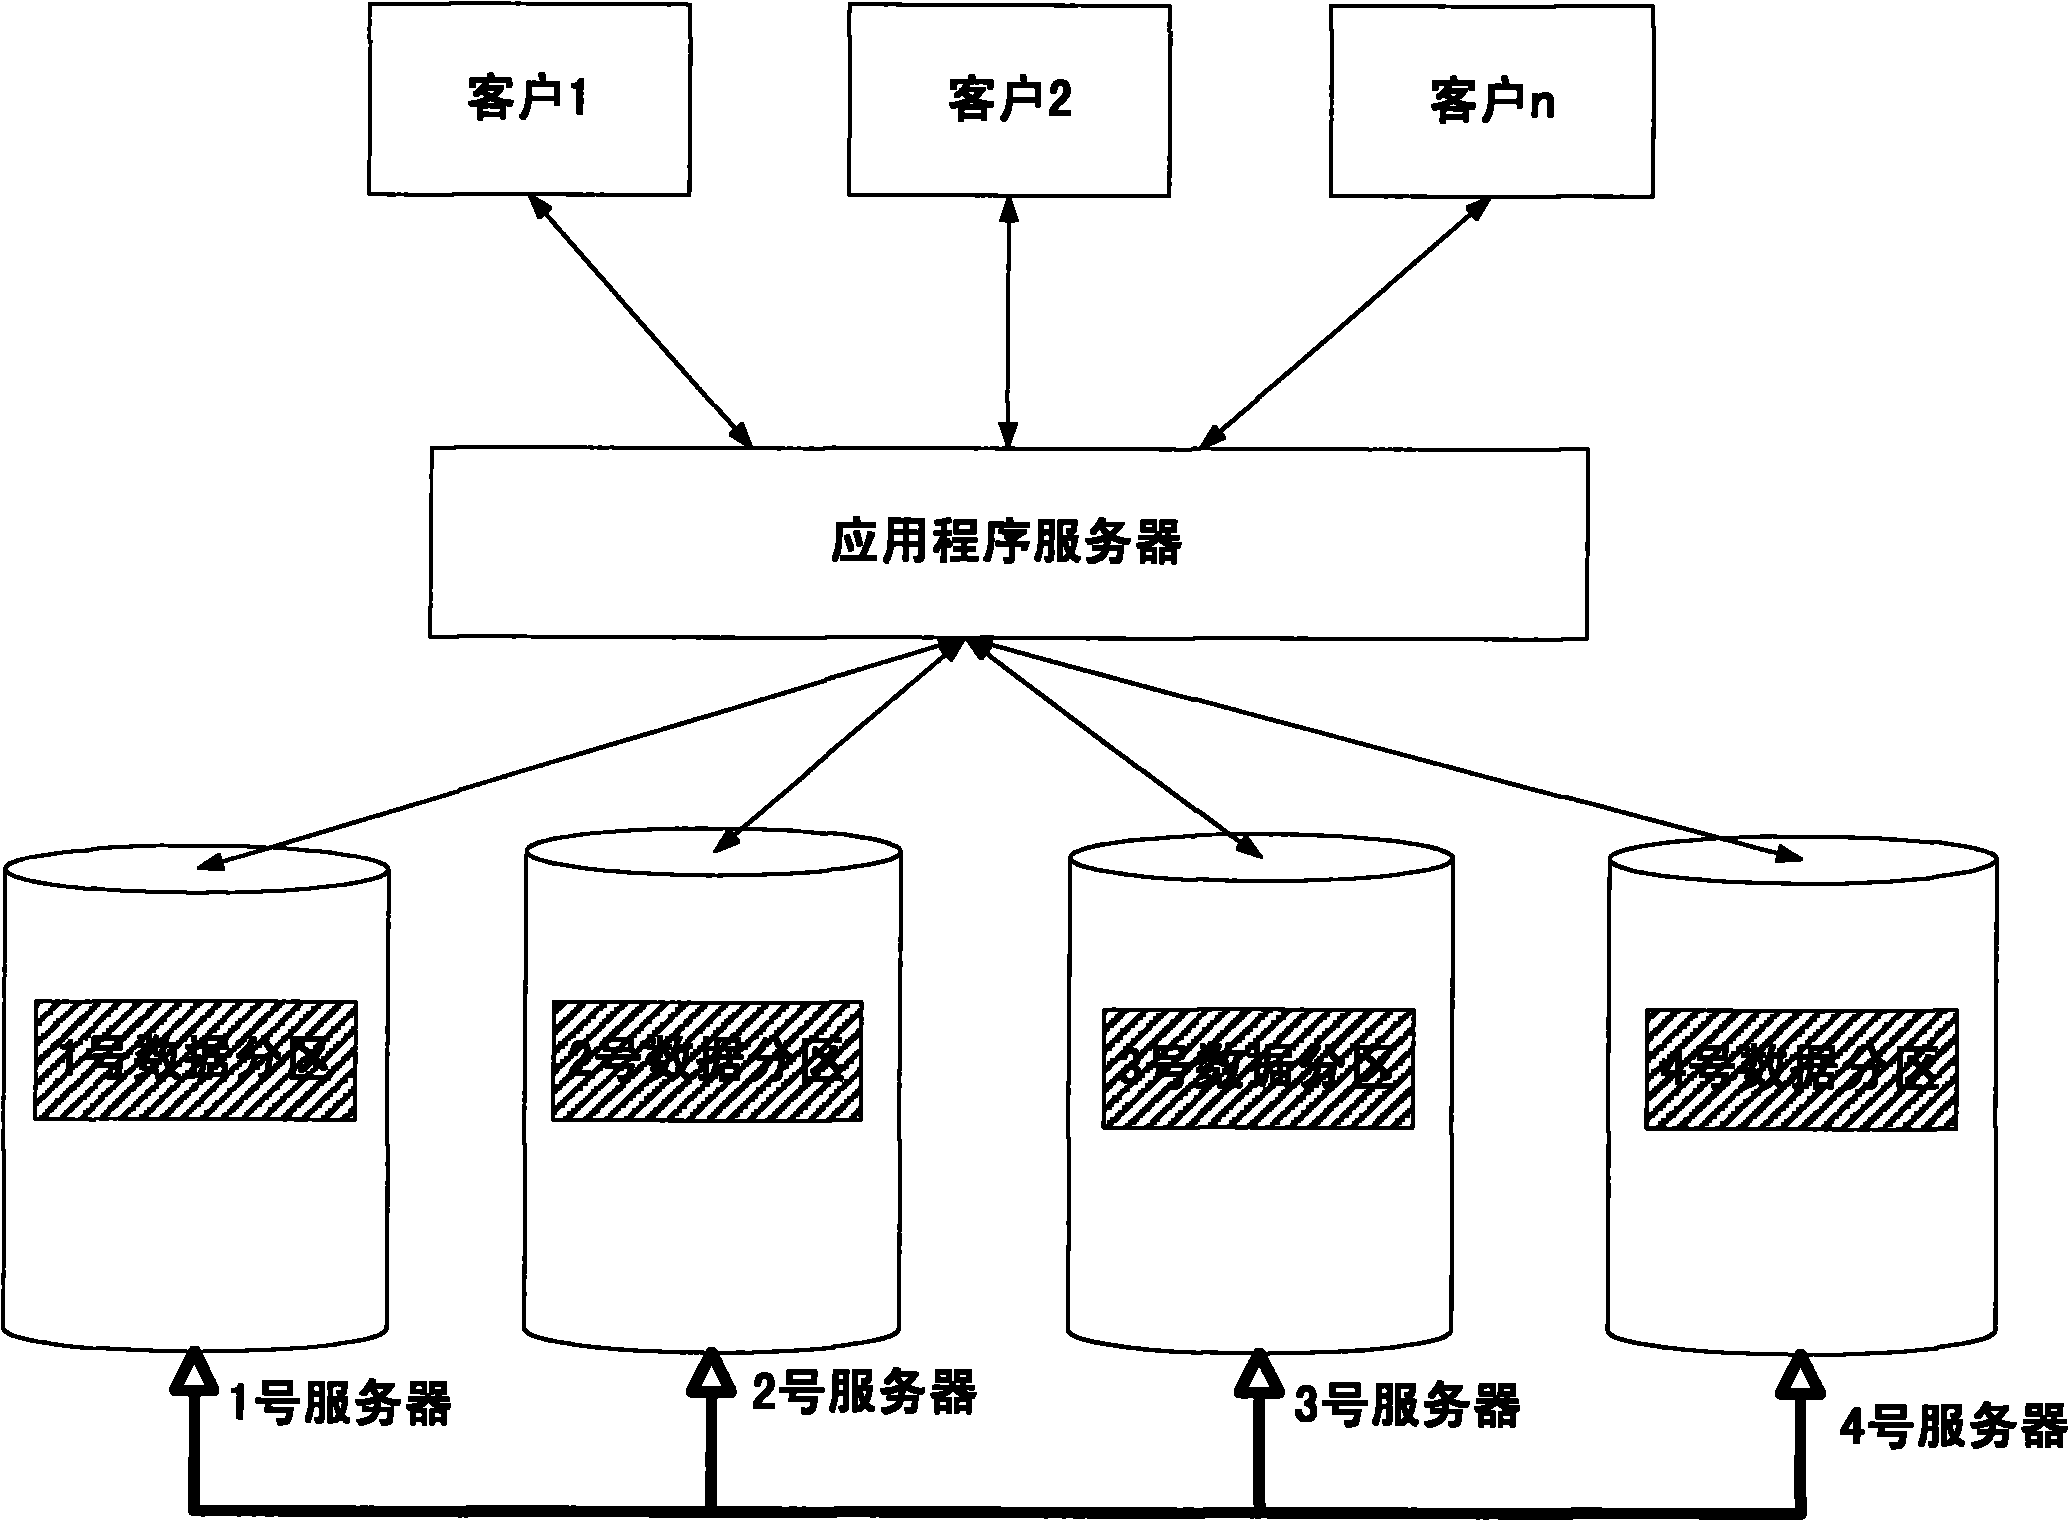 Distributed database parallel processing system